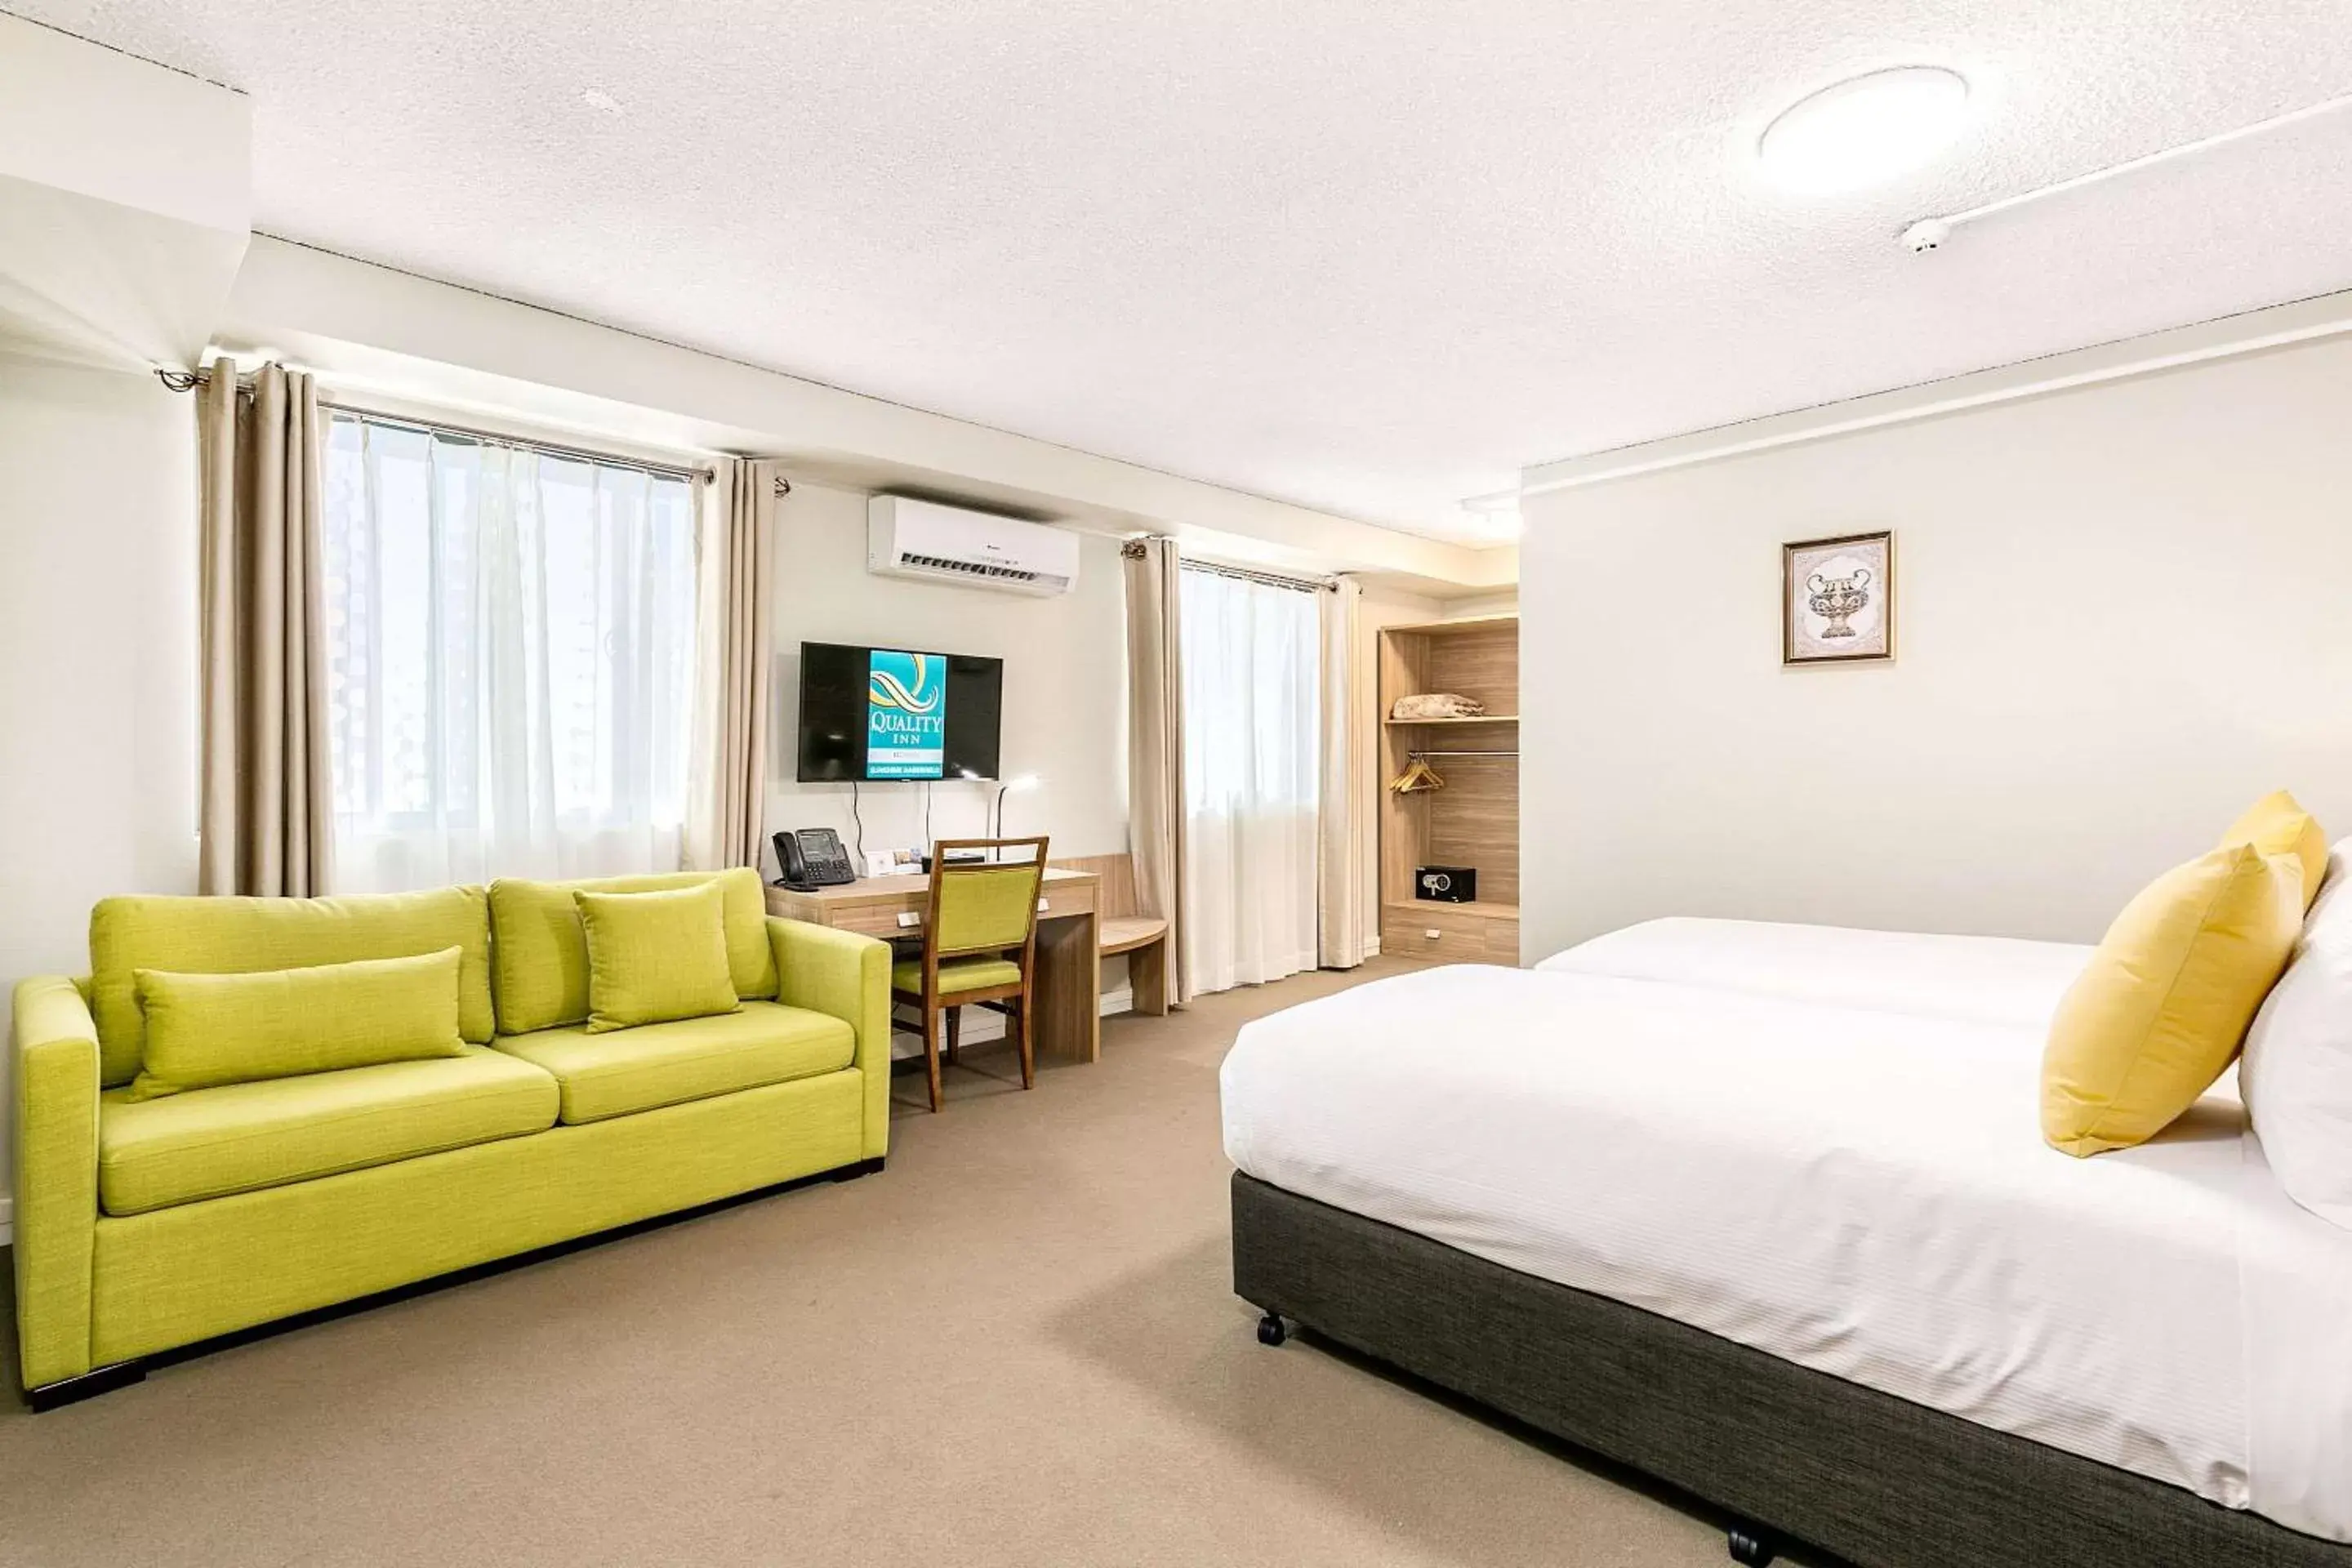 Queen Room with Sofa-Bed - Non-Smoking in Quality Inn Sunshine Haberfield